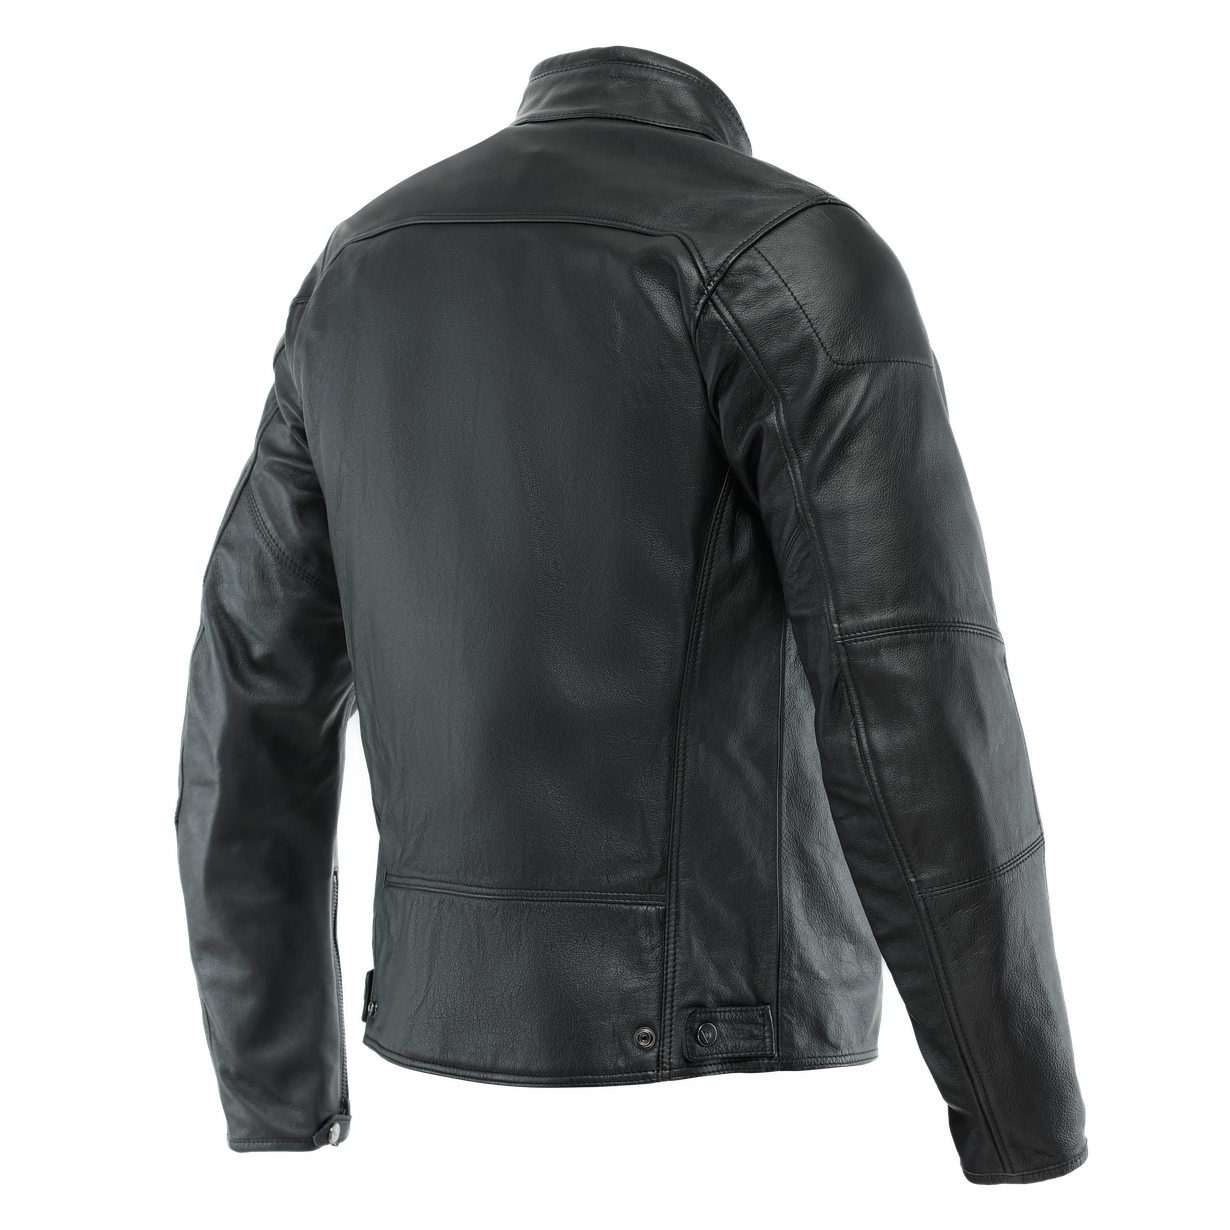 MIKE 3 LEATHER JACKET – DAINESE HONG KONG